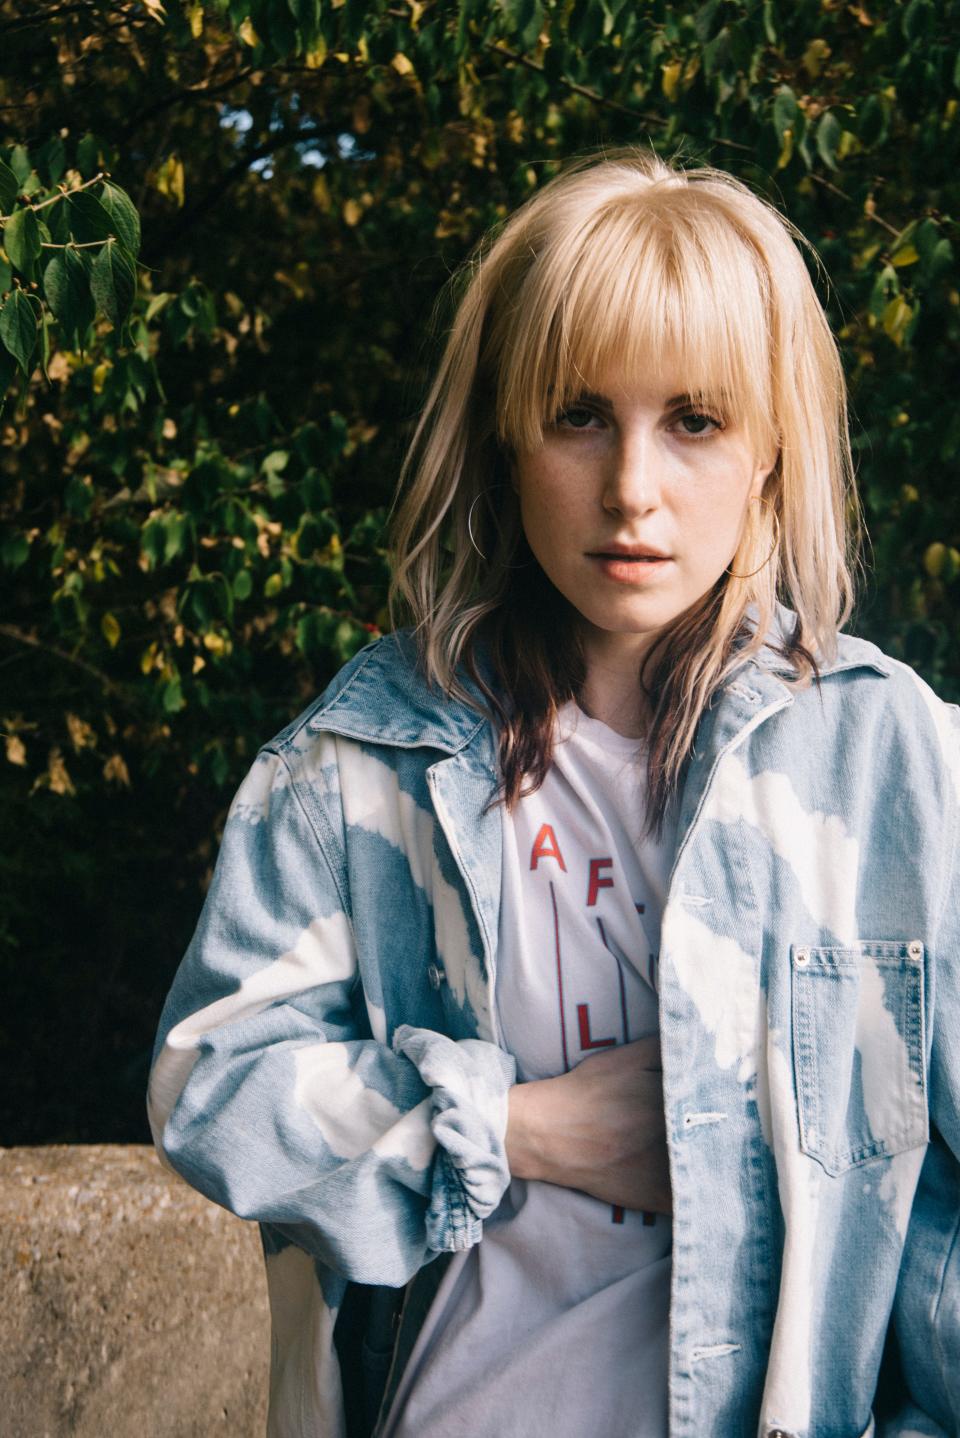 Hayley Williams, who rose to fame as the lead singer of Paramore, will release her first solo album "Petals For Armor" on Friday.